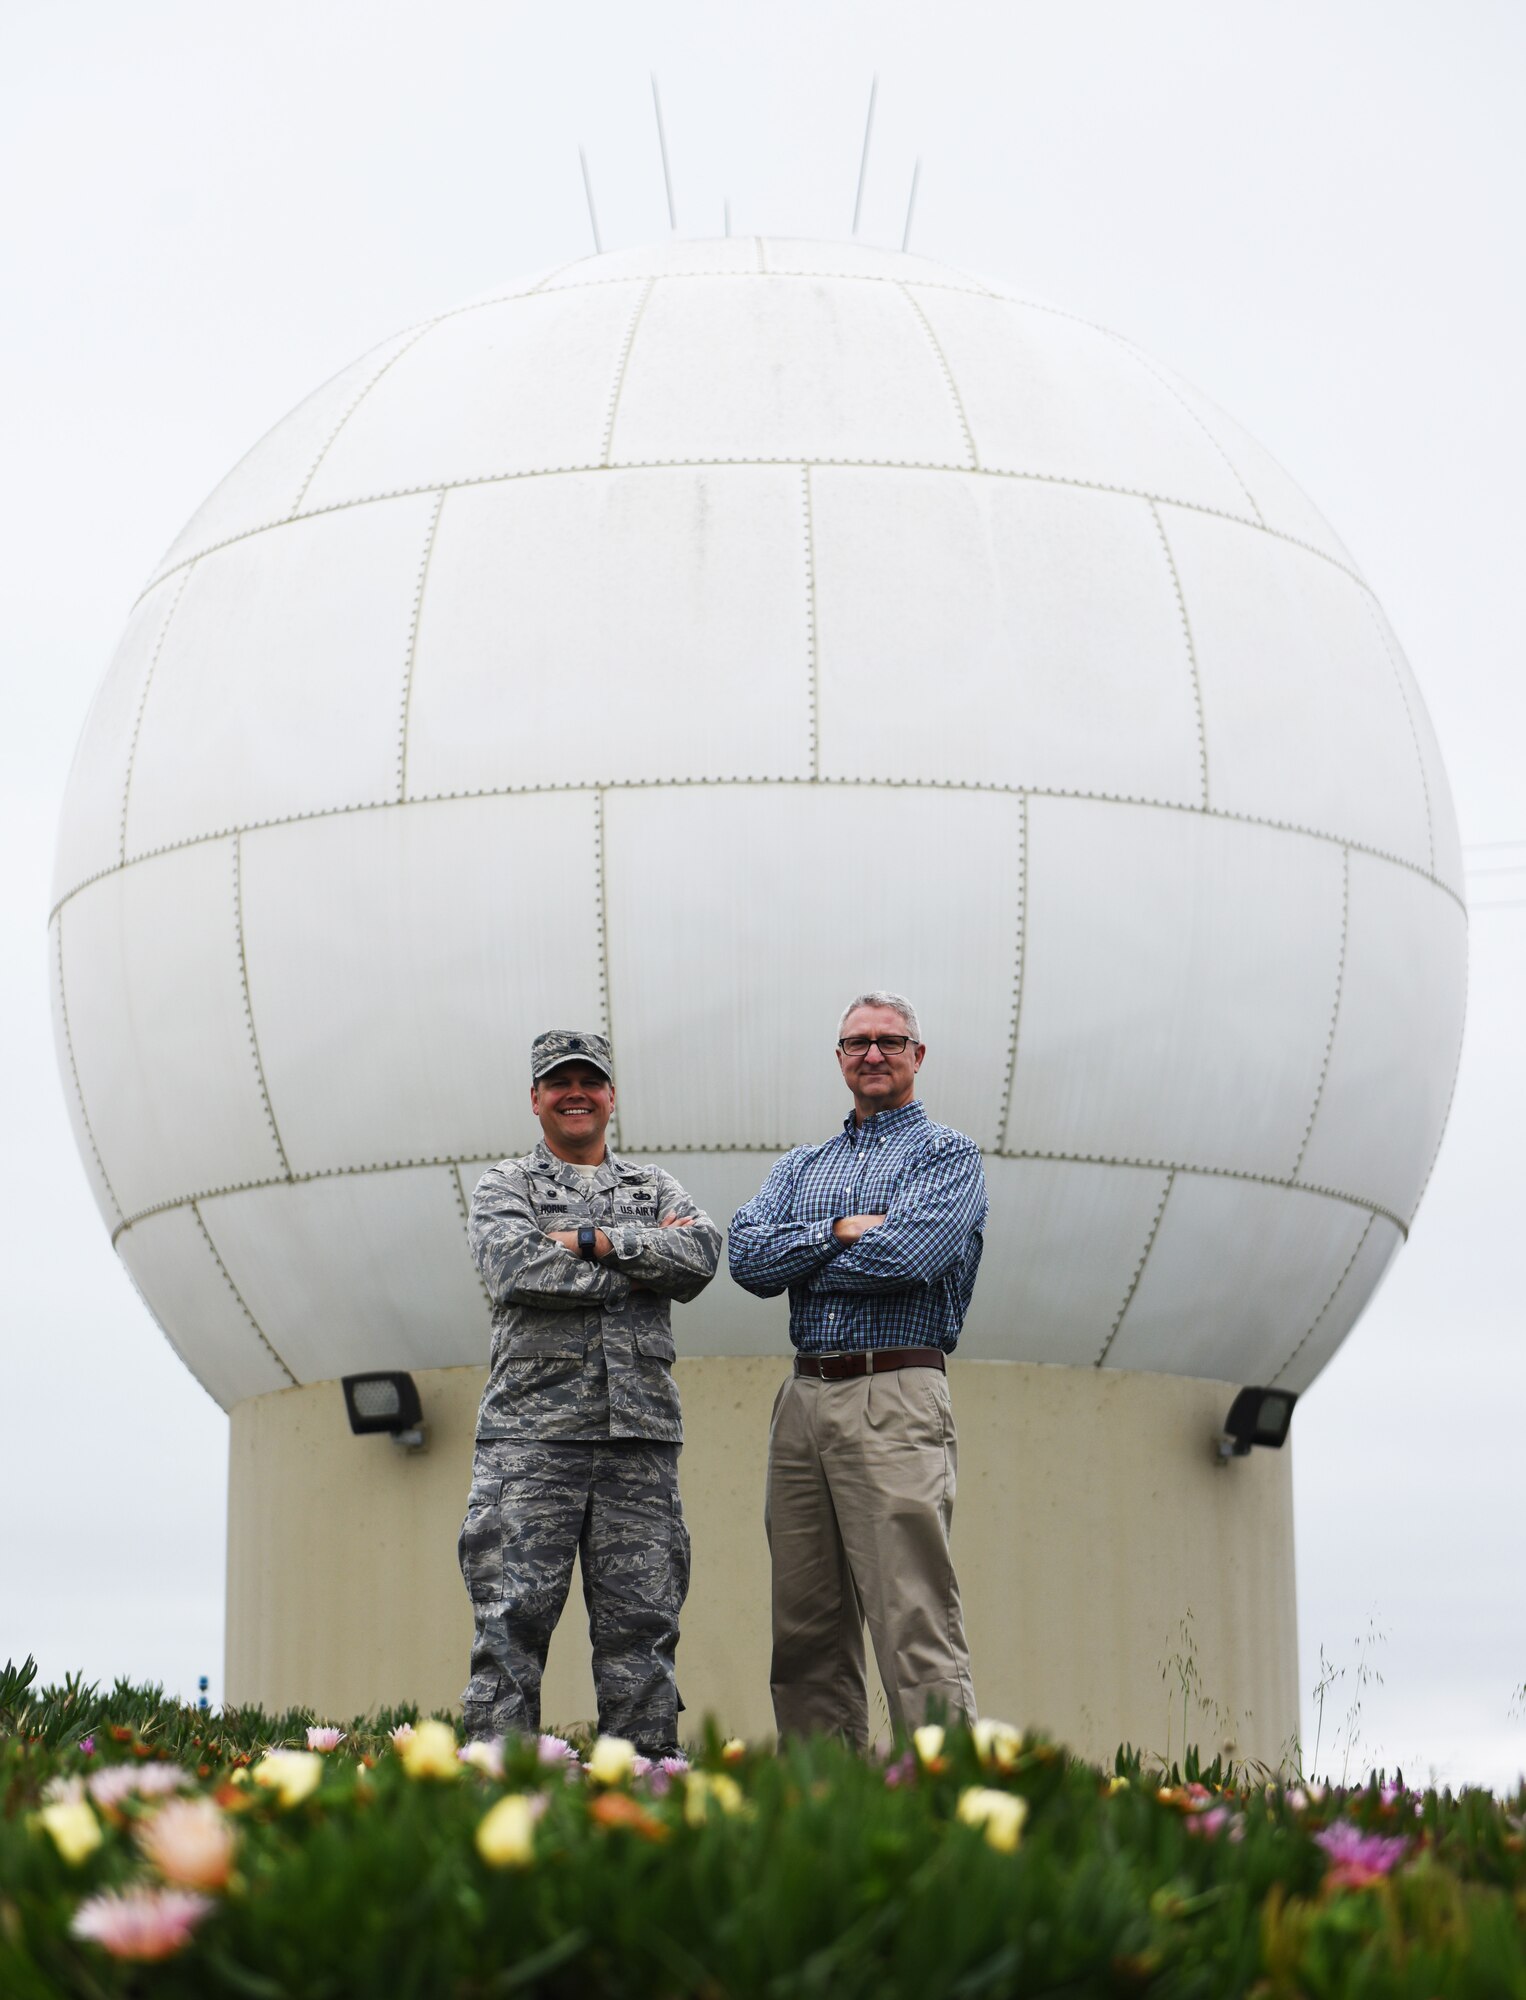 Lt. Col. Jim Horne, 30th Range Maintenance Squadron commander, stands with Bill Prenot, 30th Space Wing director of plans and programs, at a Command Transmitter site, April 12, 2016, Vandenberg Air Force Base, Calif. Prenot was the first commander for the 30th RMS taking command in mid-2003. (U.S. Air Force photo by Senior Airman Ian Dudley/Released)